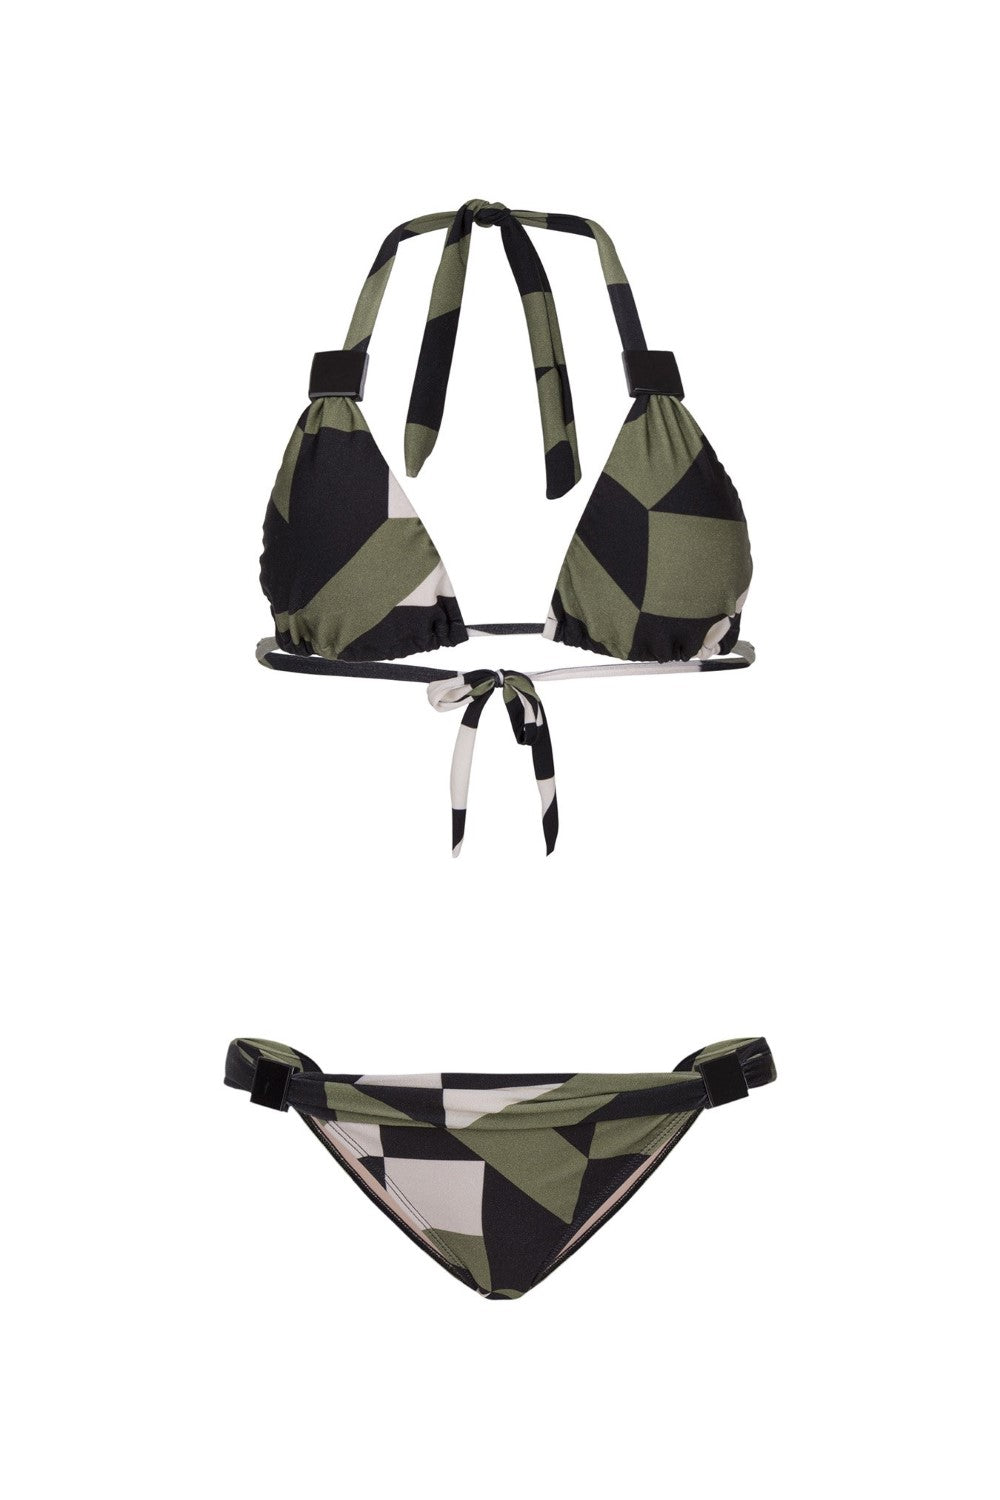 This geometric print bikini is part of the label’s basic-lined collection